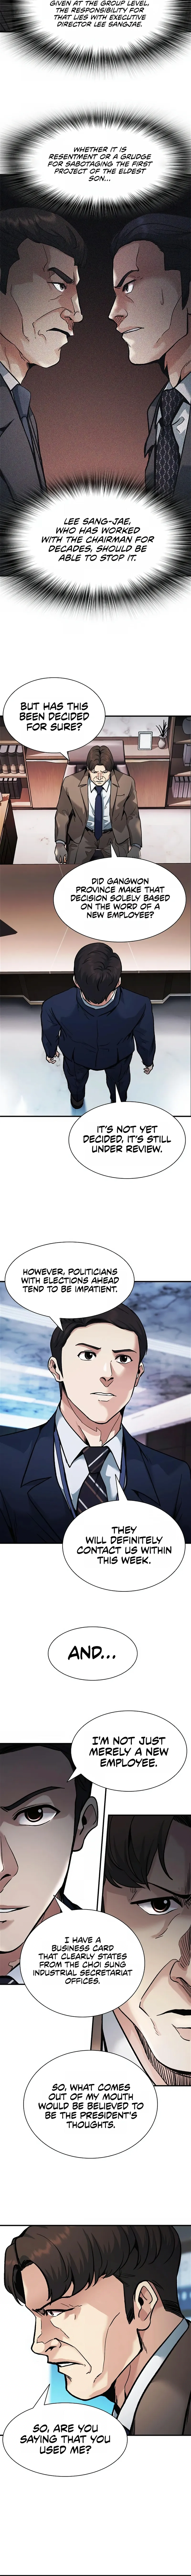 Chairman Kang: The Newcomer Chapter 16 page 7